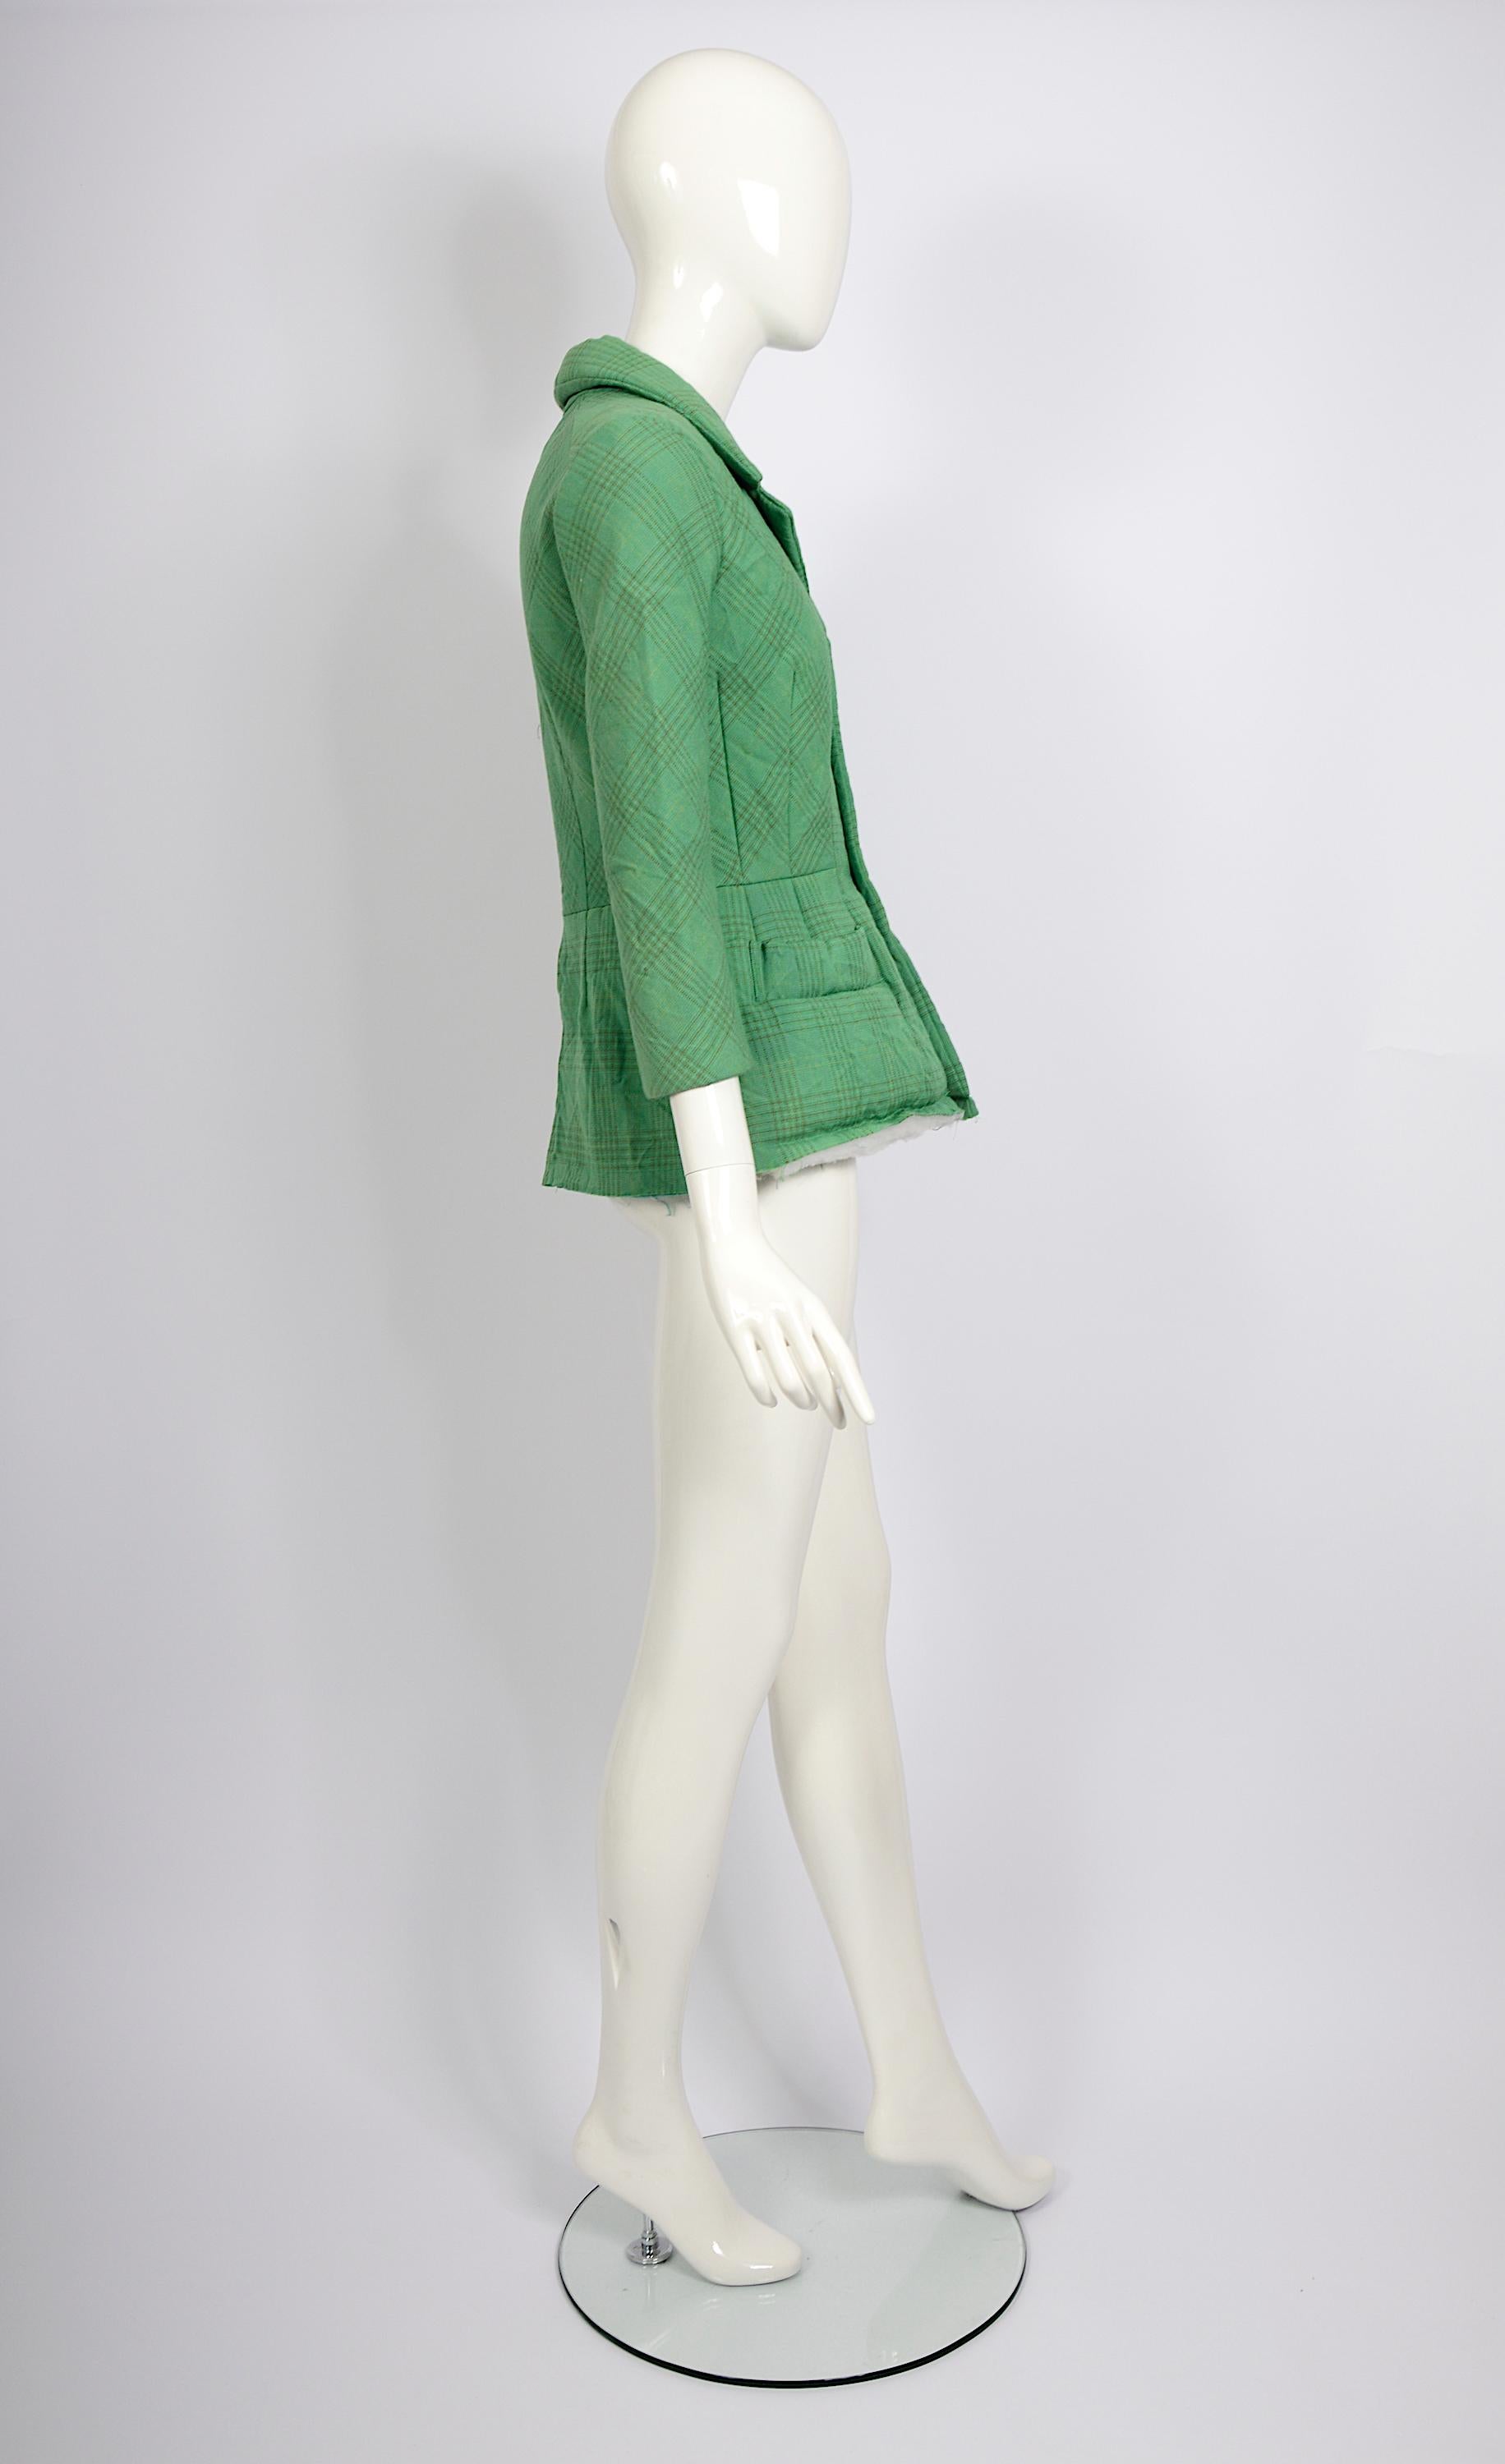 Comme des Garçons by Junya Watanabe vintage FW 2004 green padded basque jacket   For Sale 4